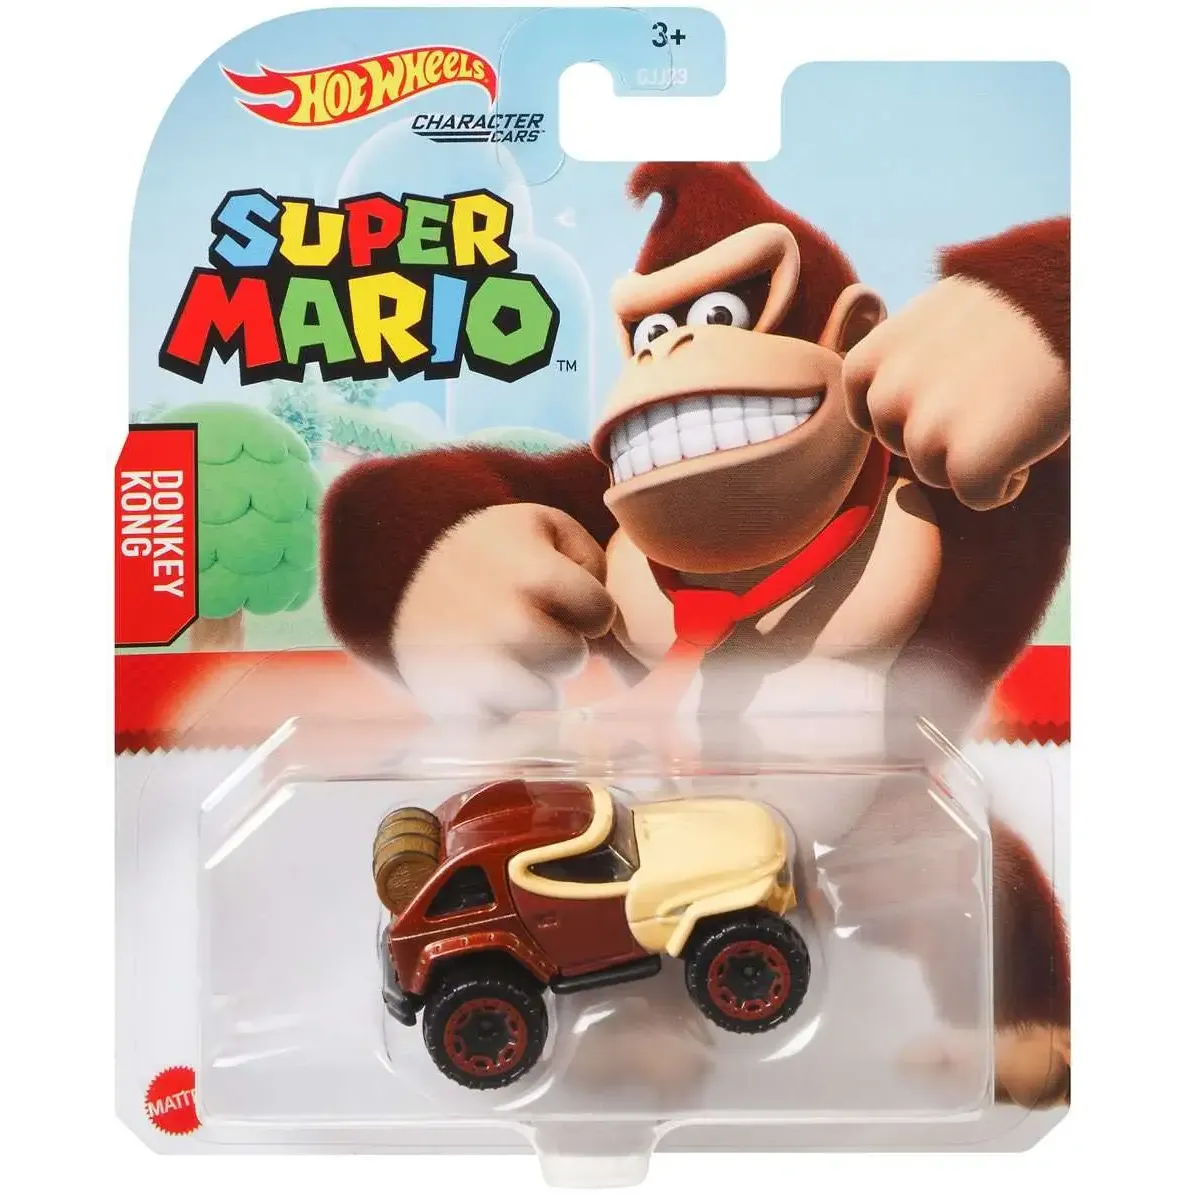 Hot Wheels Super Mario Character Cars: Donkey Kong: 1:64 Scale: HDM87 In Blister 2021 Release